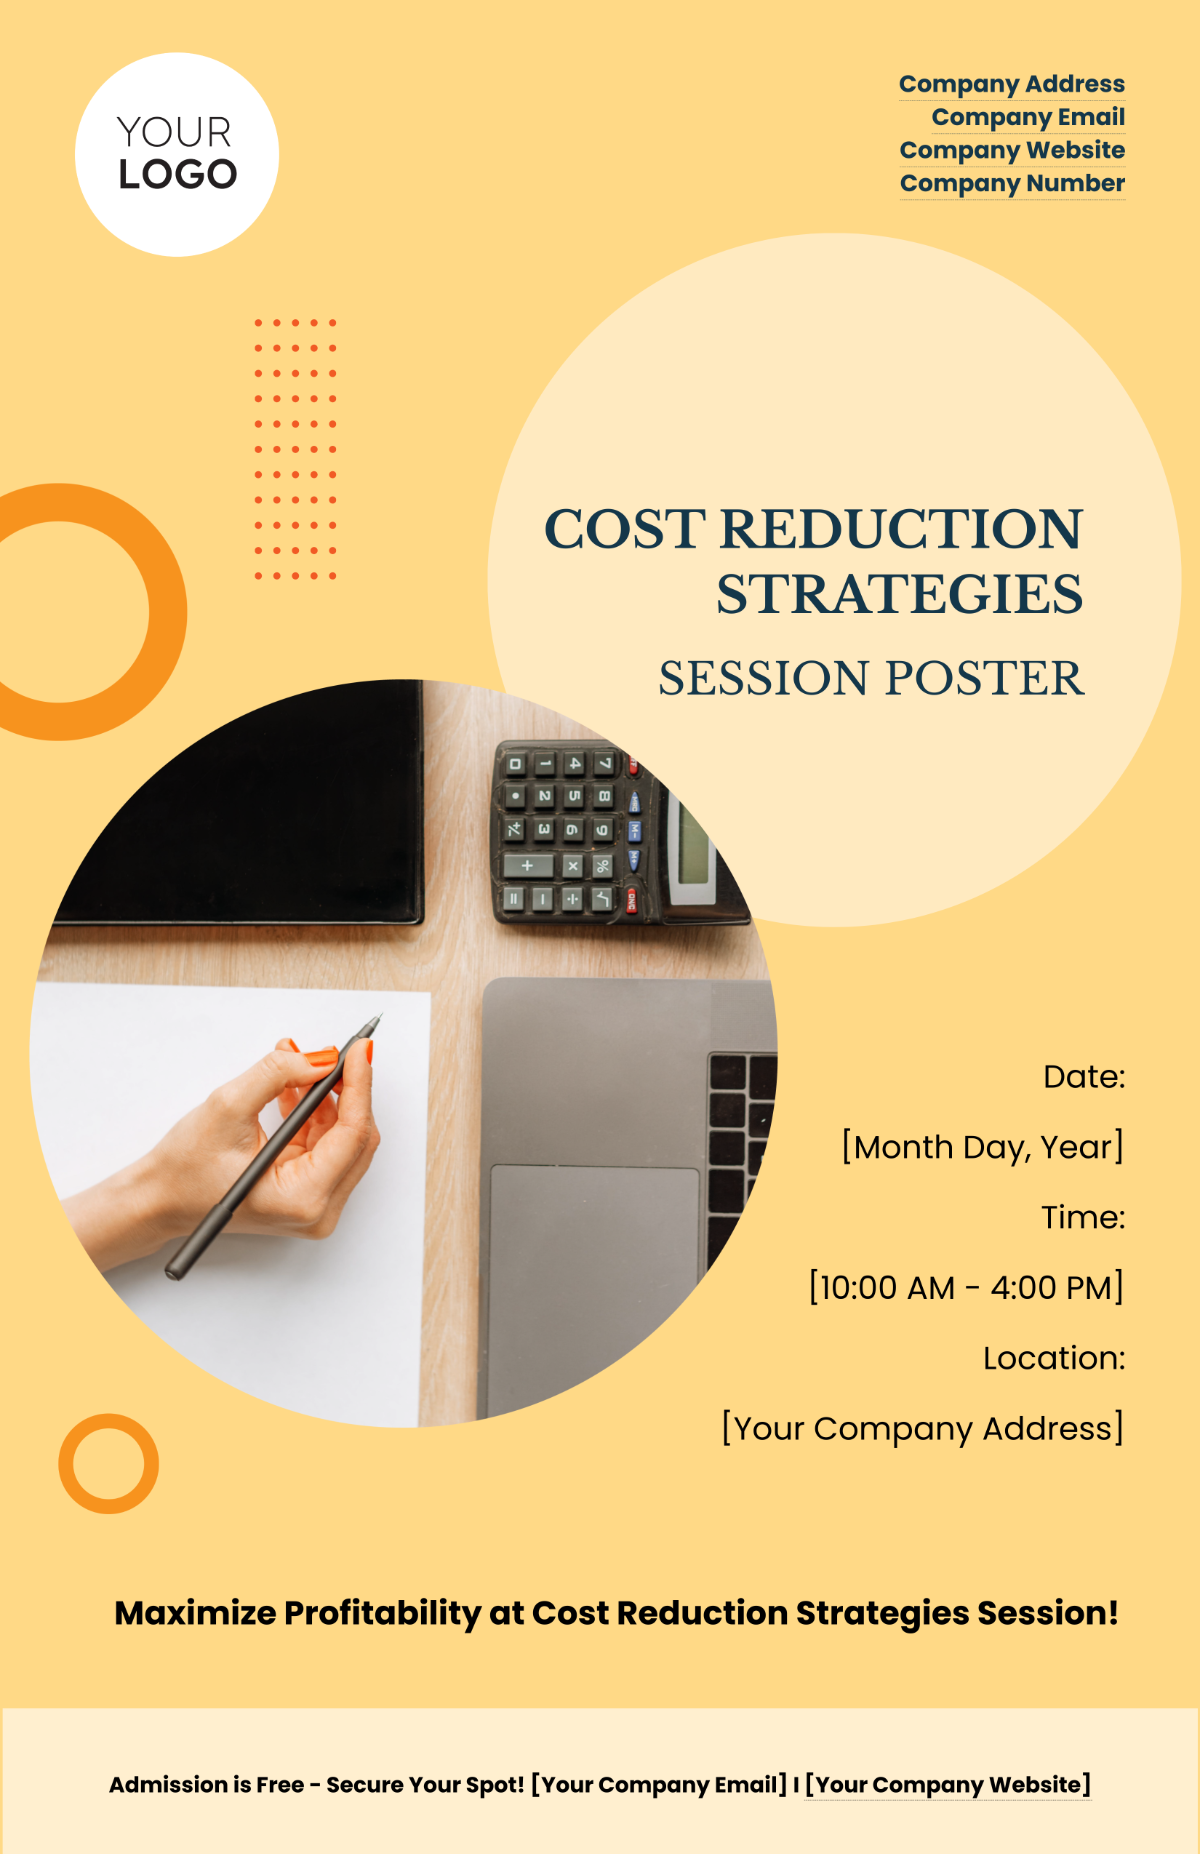 Cost Reduction Strategies Session Poster